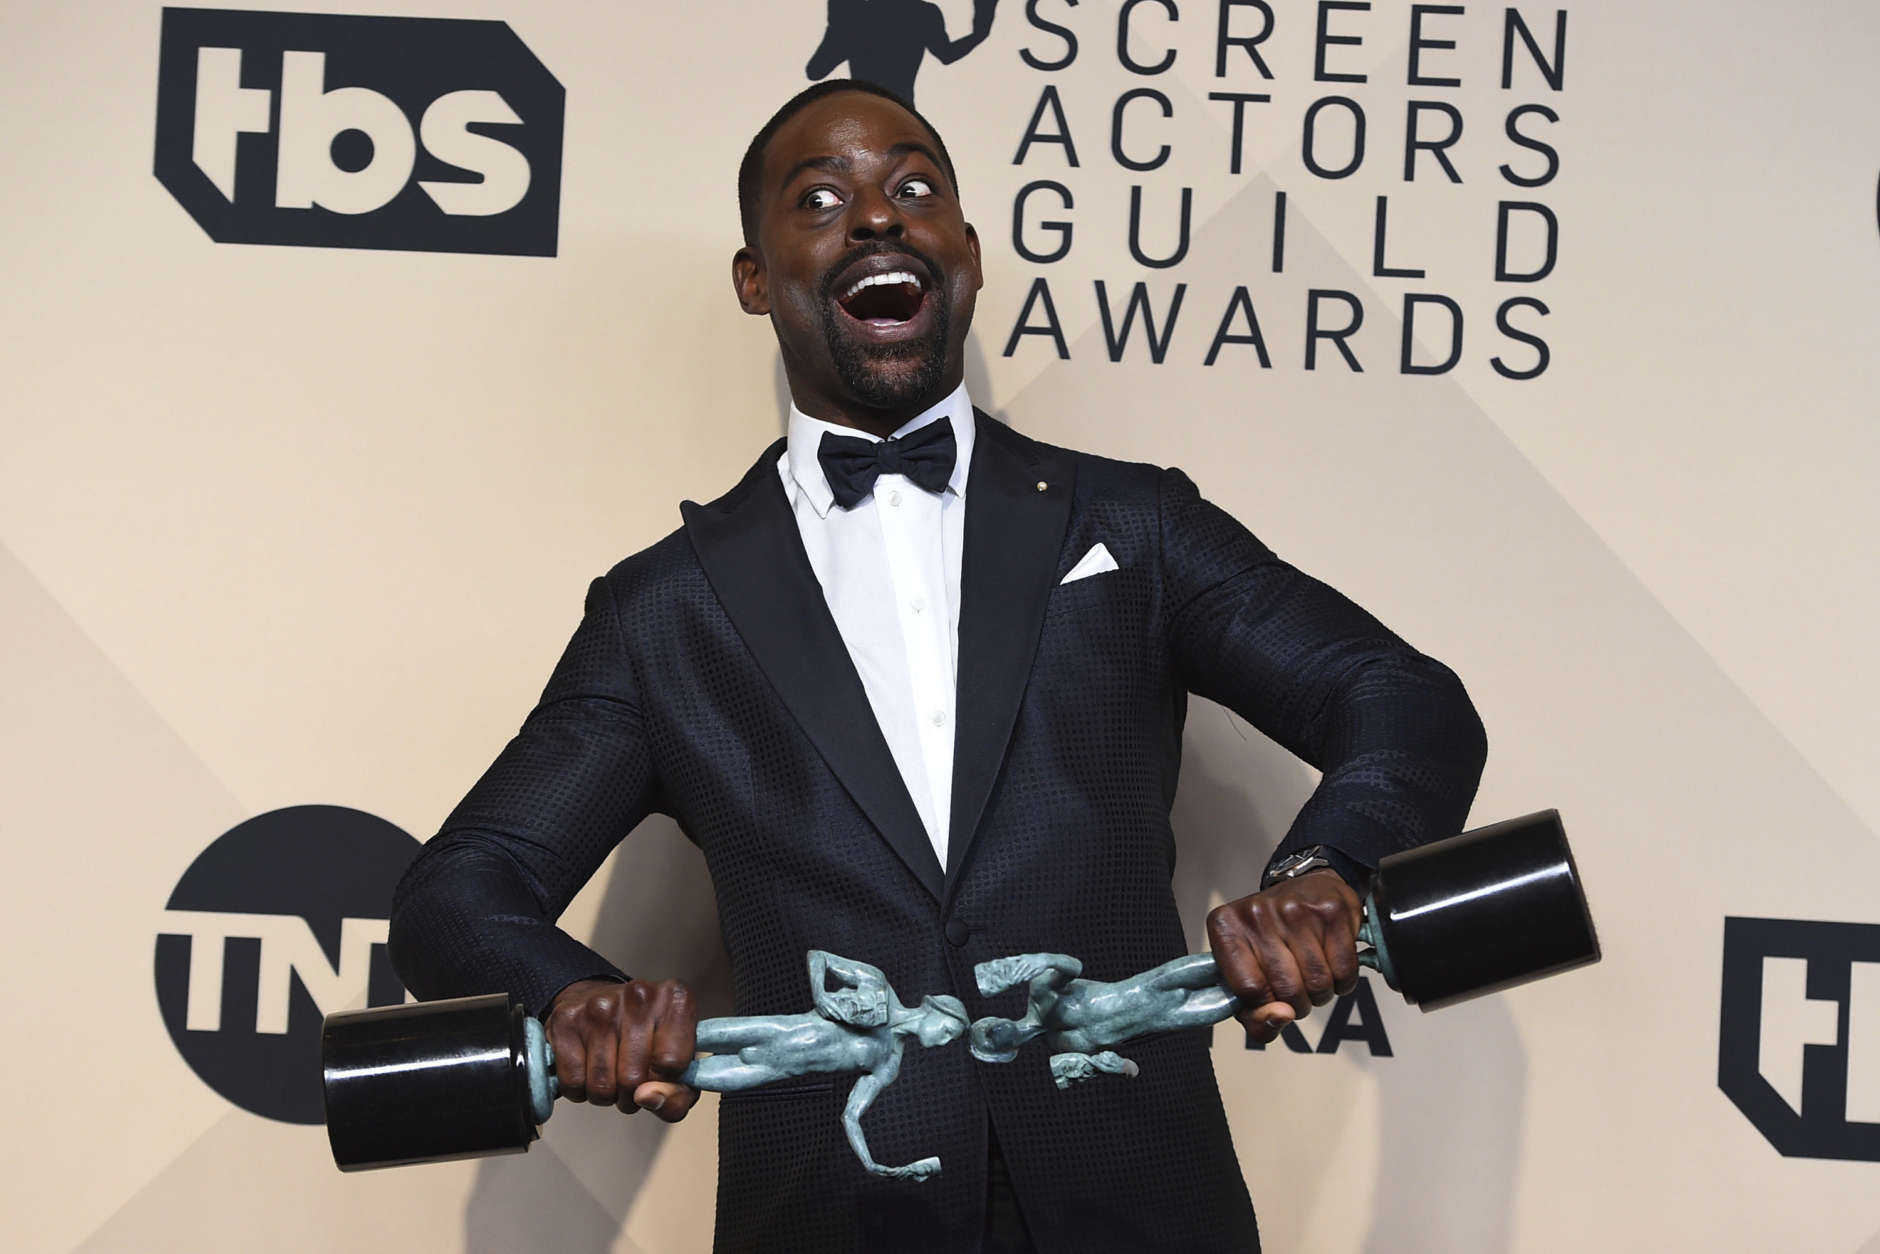 Sterling K. Brown, winner of the awards for outstanding performance by a male actor in a drama series for "This Is Us" and for outstanding performance by an ensemble in a drama series for "This Is Us", poses in the press room at the 24th annual Screen Actors Guild Awards at the Shrine Auditorium &amp; Expo Hall on Sunday, Jan. 21, 2018, in Los Angeles. (Photo by Jordan Strauss/Invision/AP)